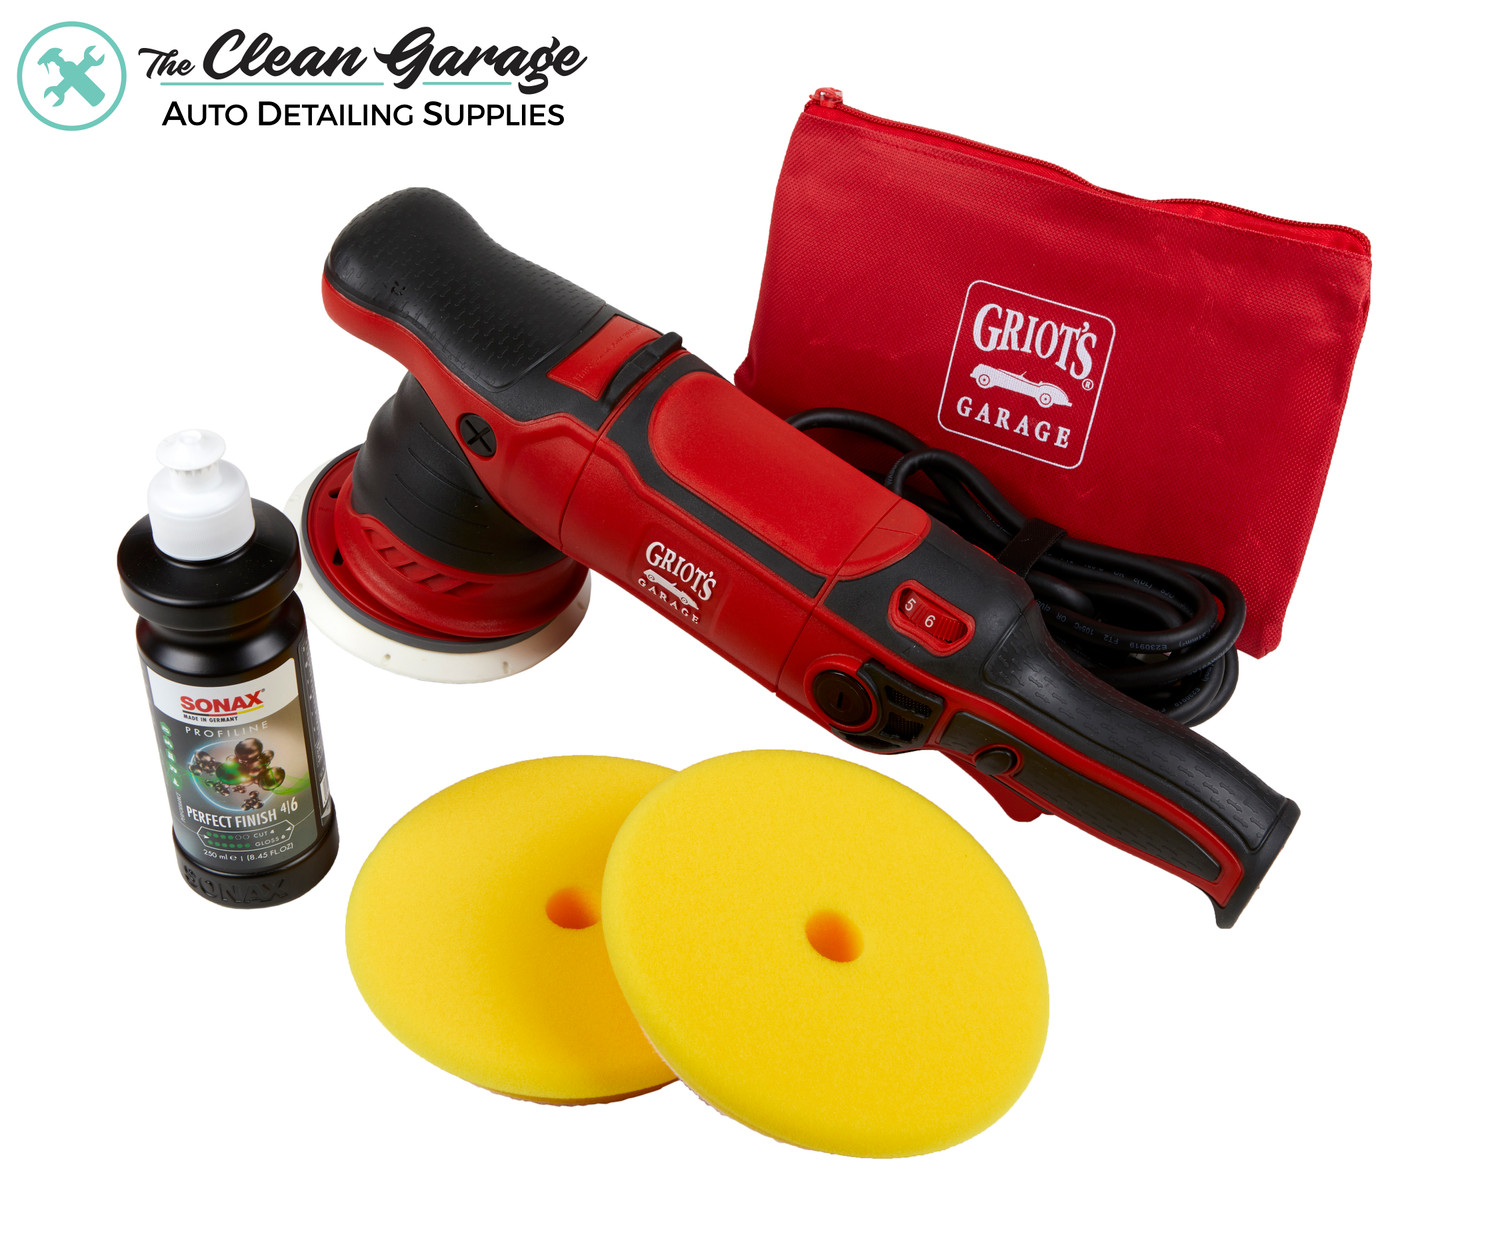 Hands-On Review] Griot's Garage 6 Inch Polisher (GG6) After 4 Years Use -  The Art of Cleanliness